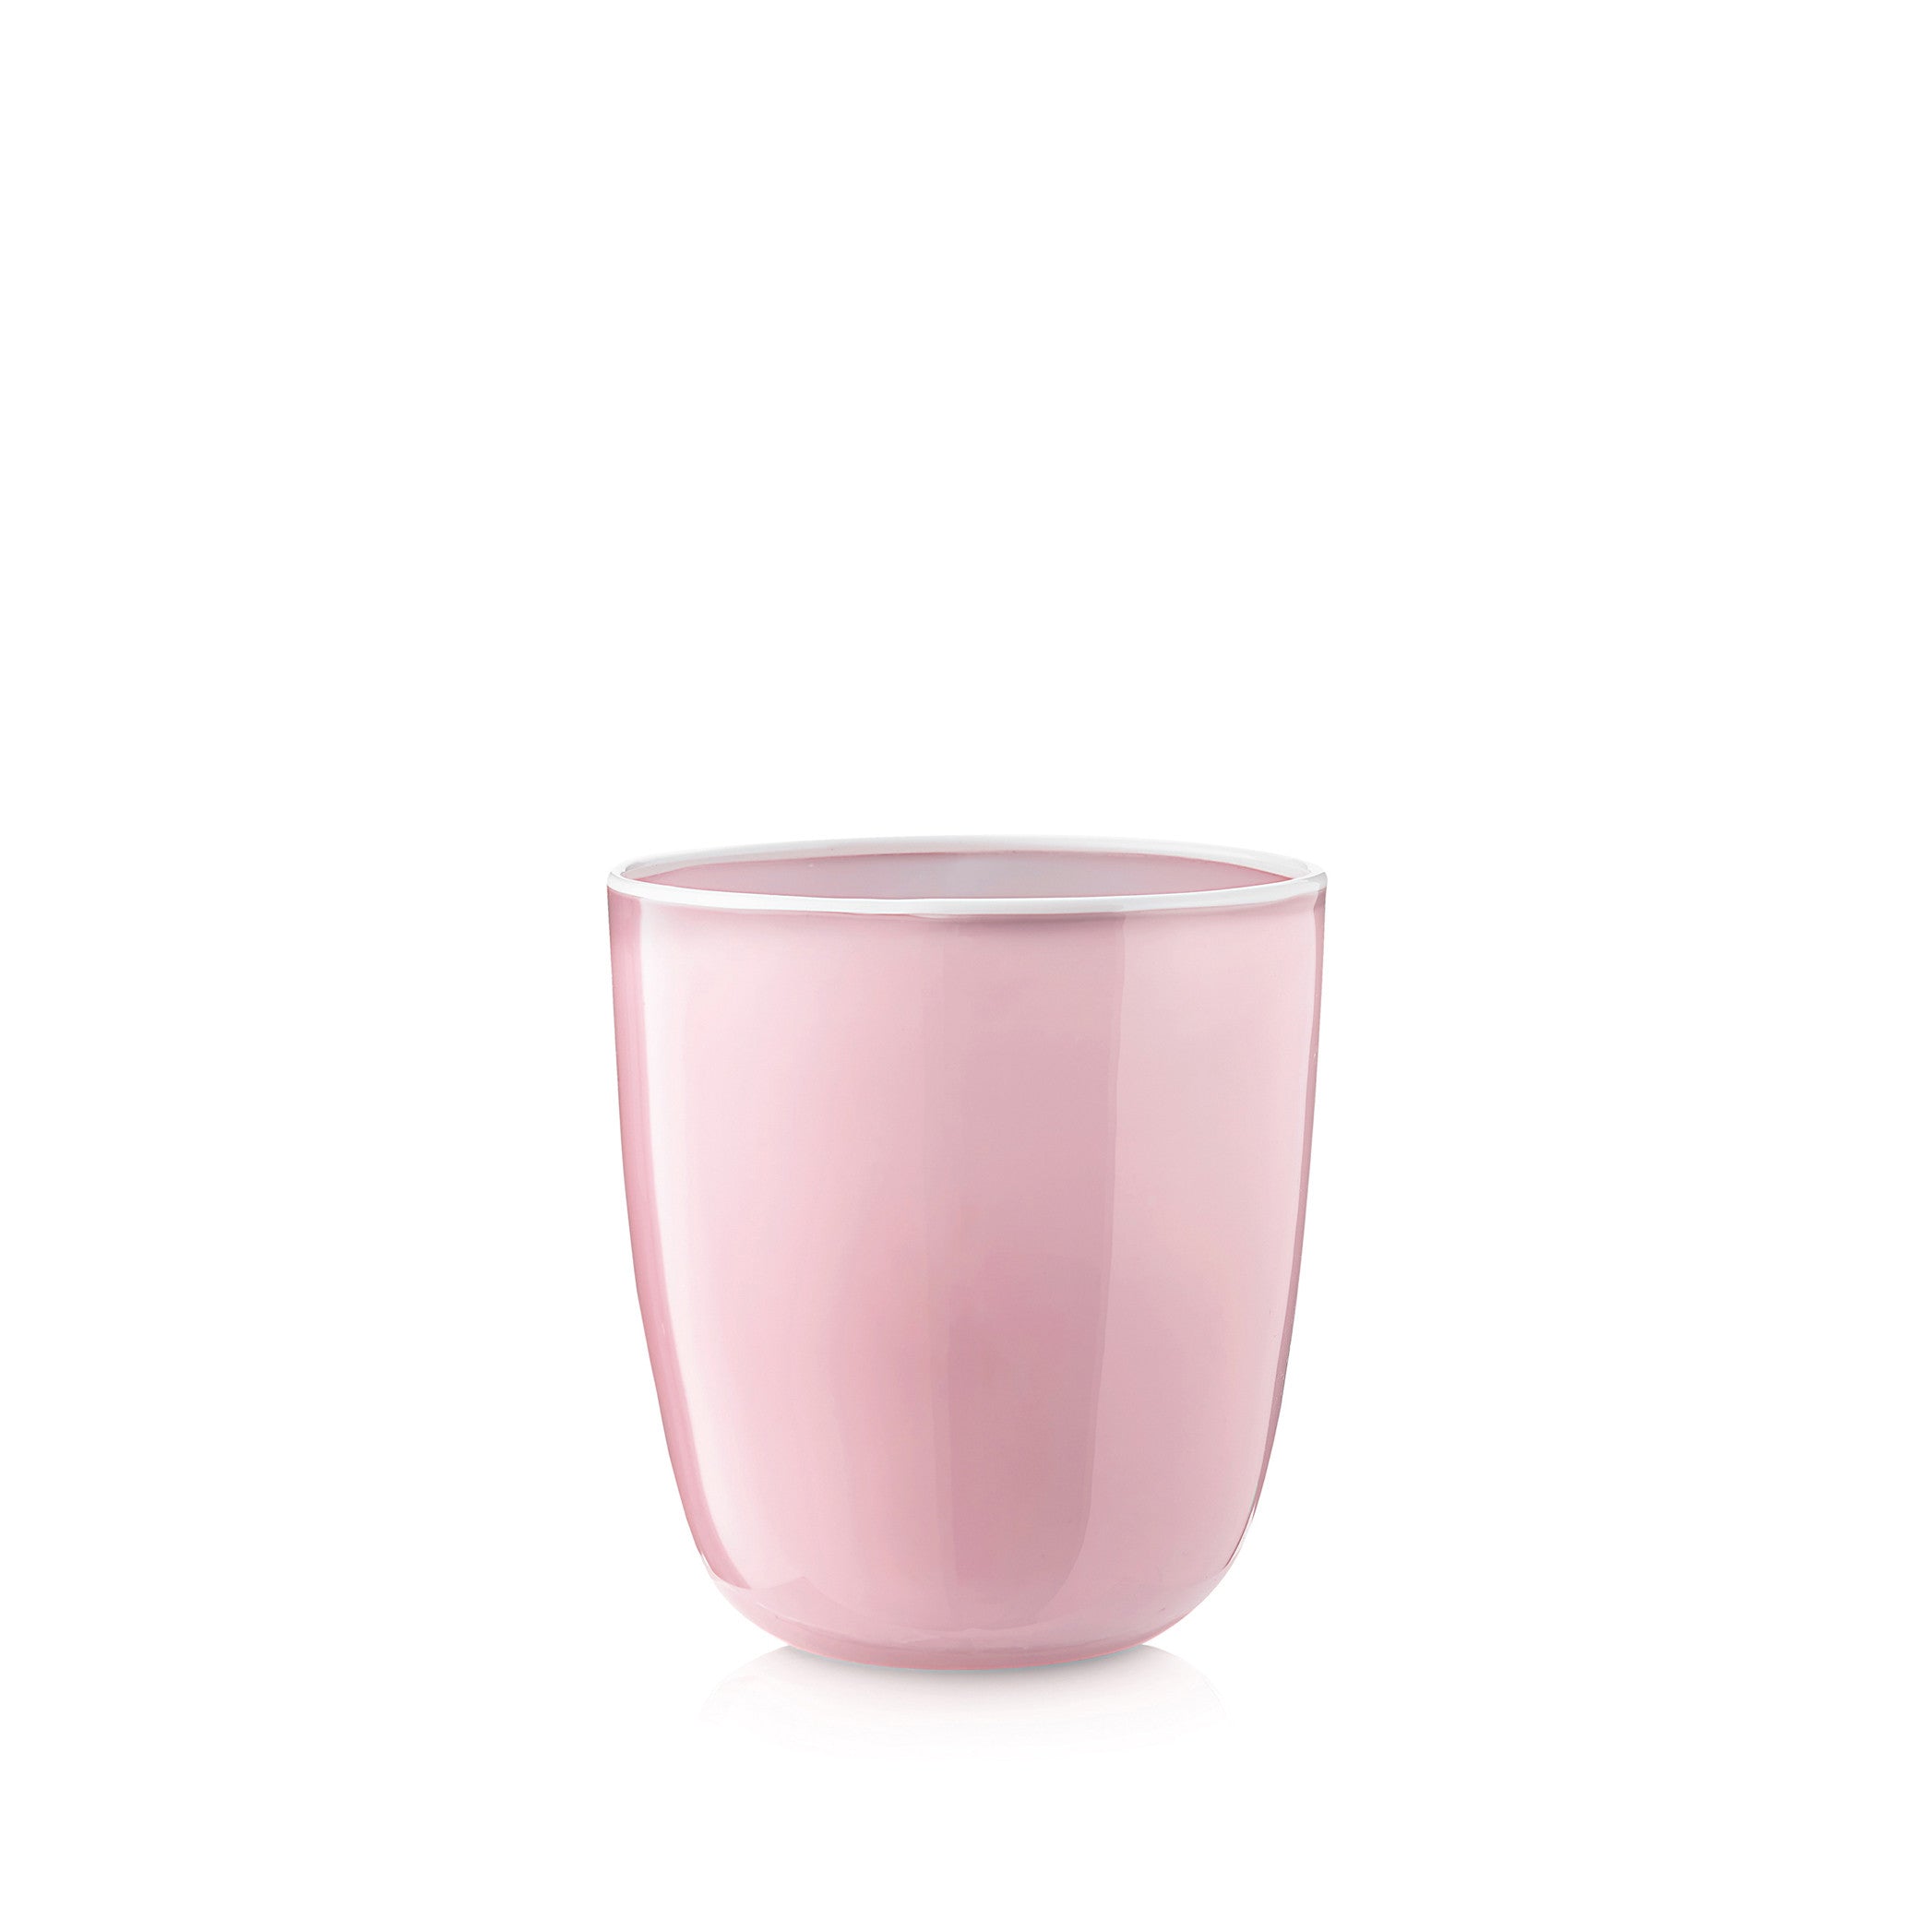 Handblown Bumba Glass in Rose Pink, 30cl